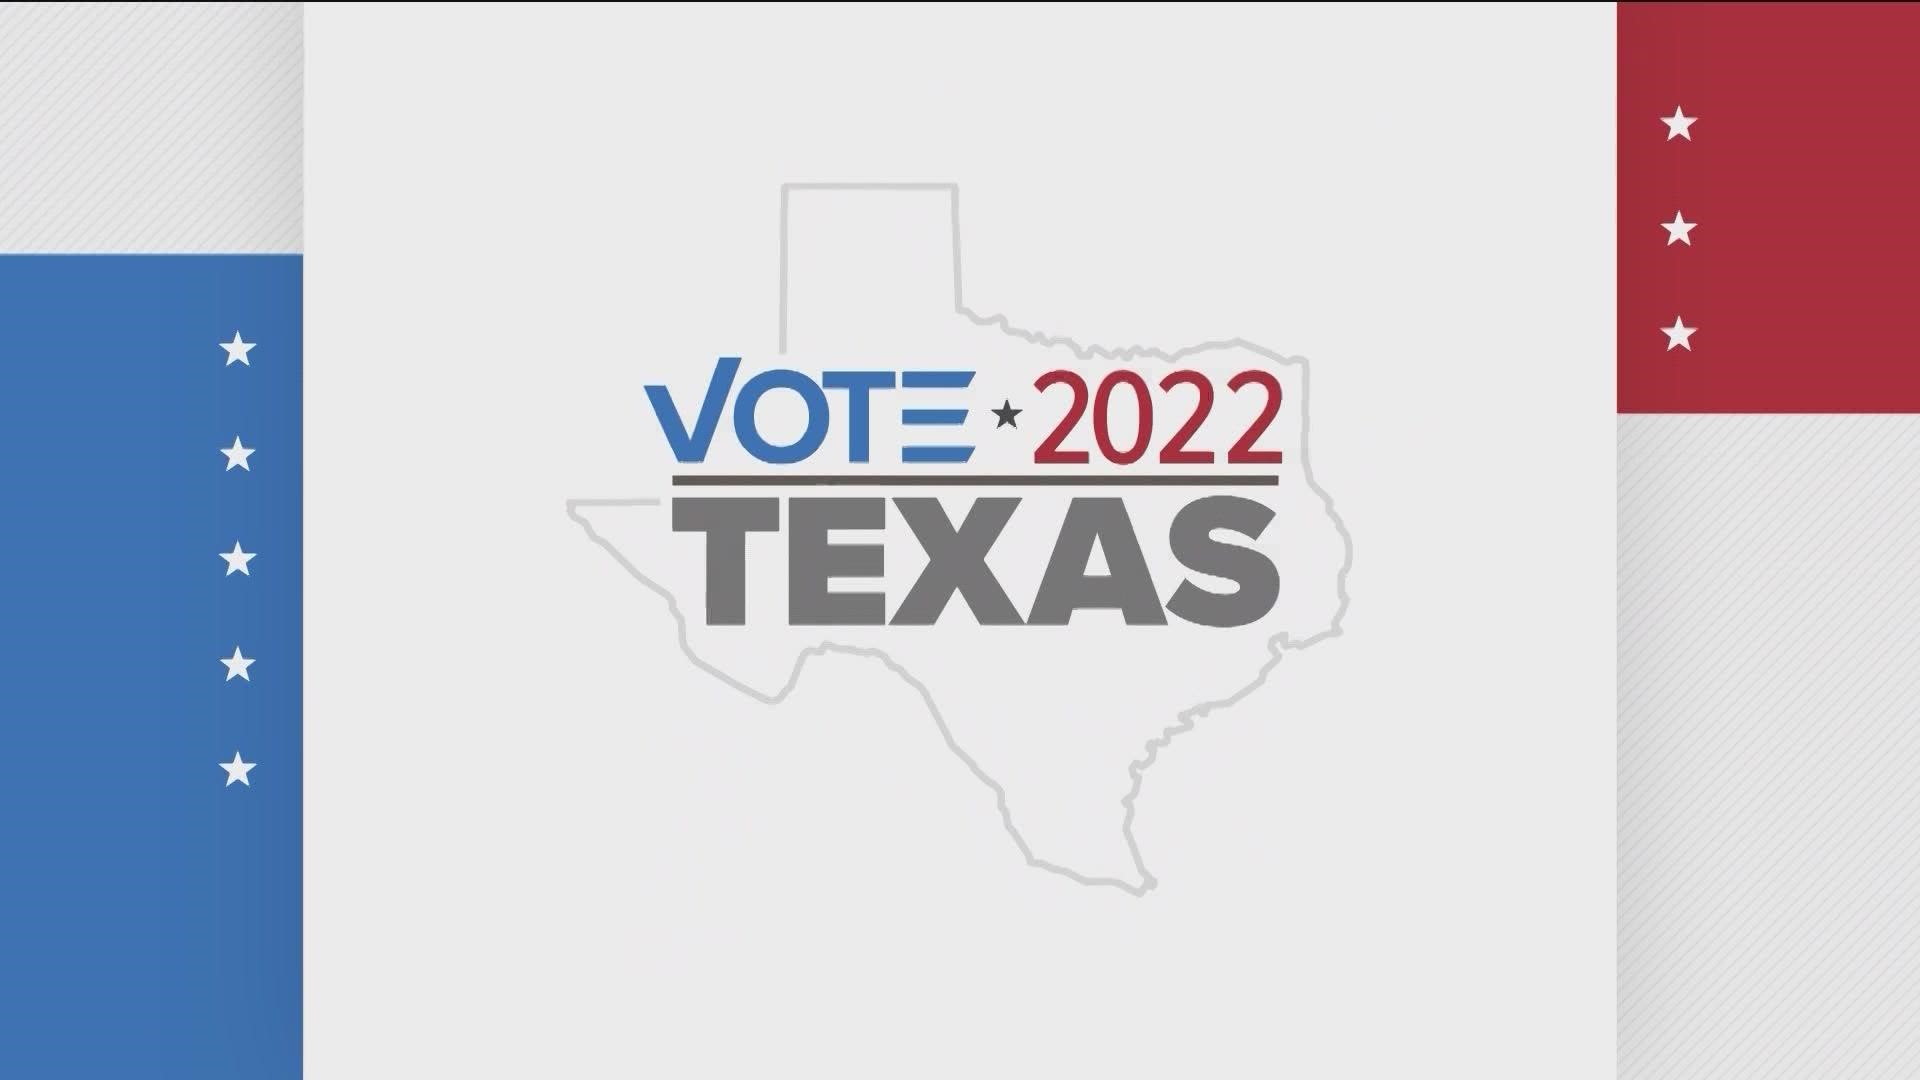 With Election Day right around the corner, residents in Texas should check if they're registered to vote. KVUE's Dominique Newland explains how to check.